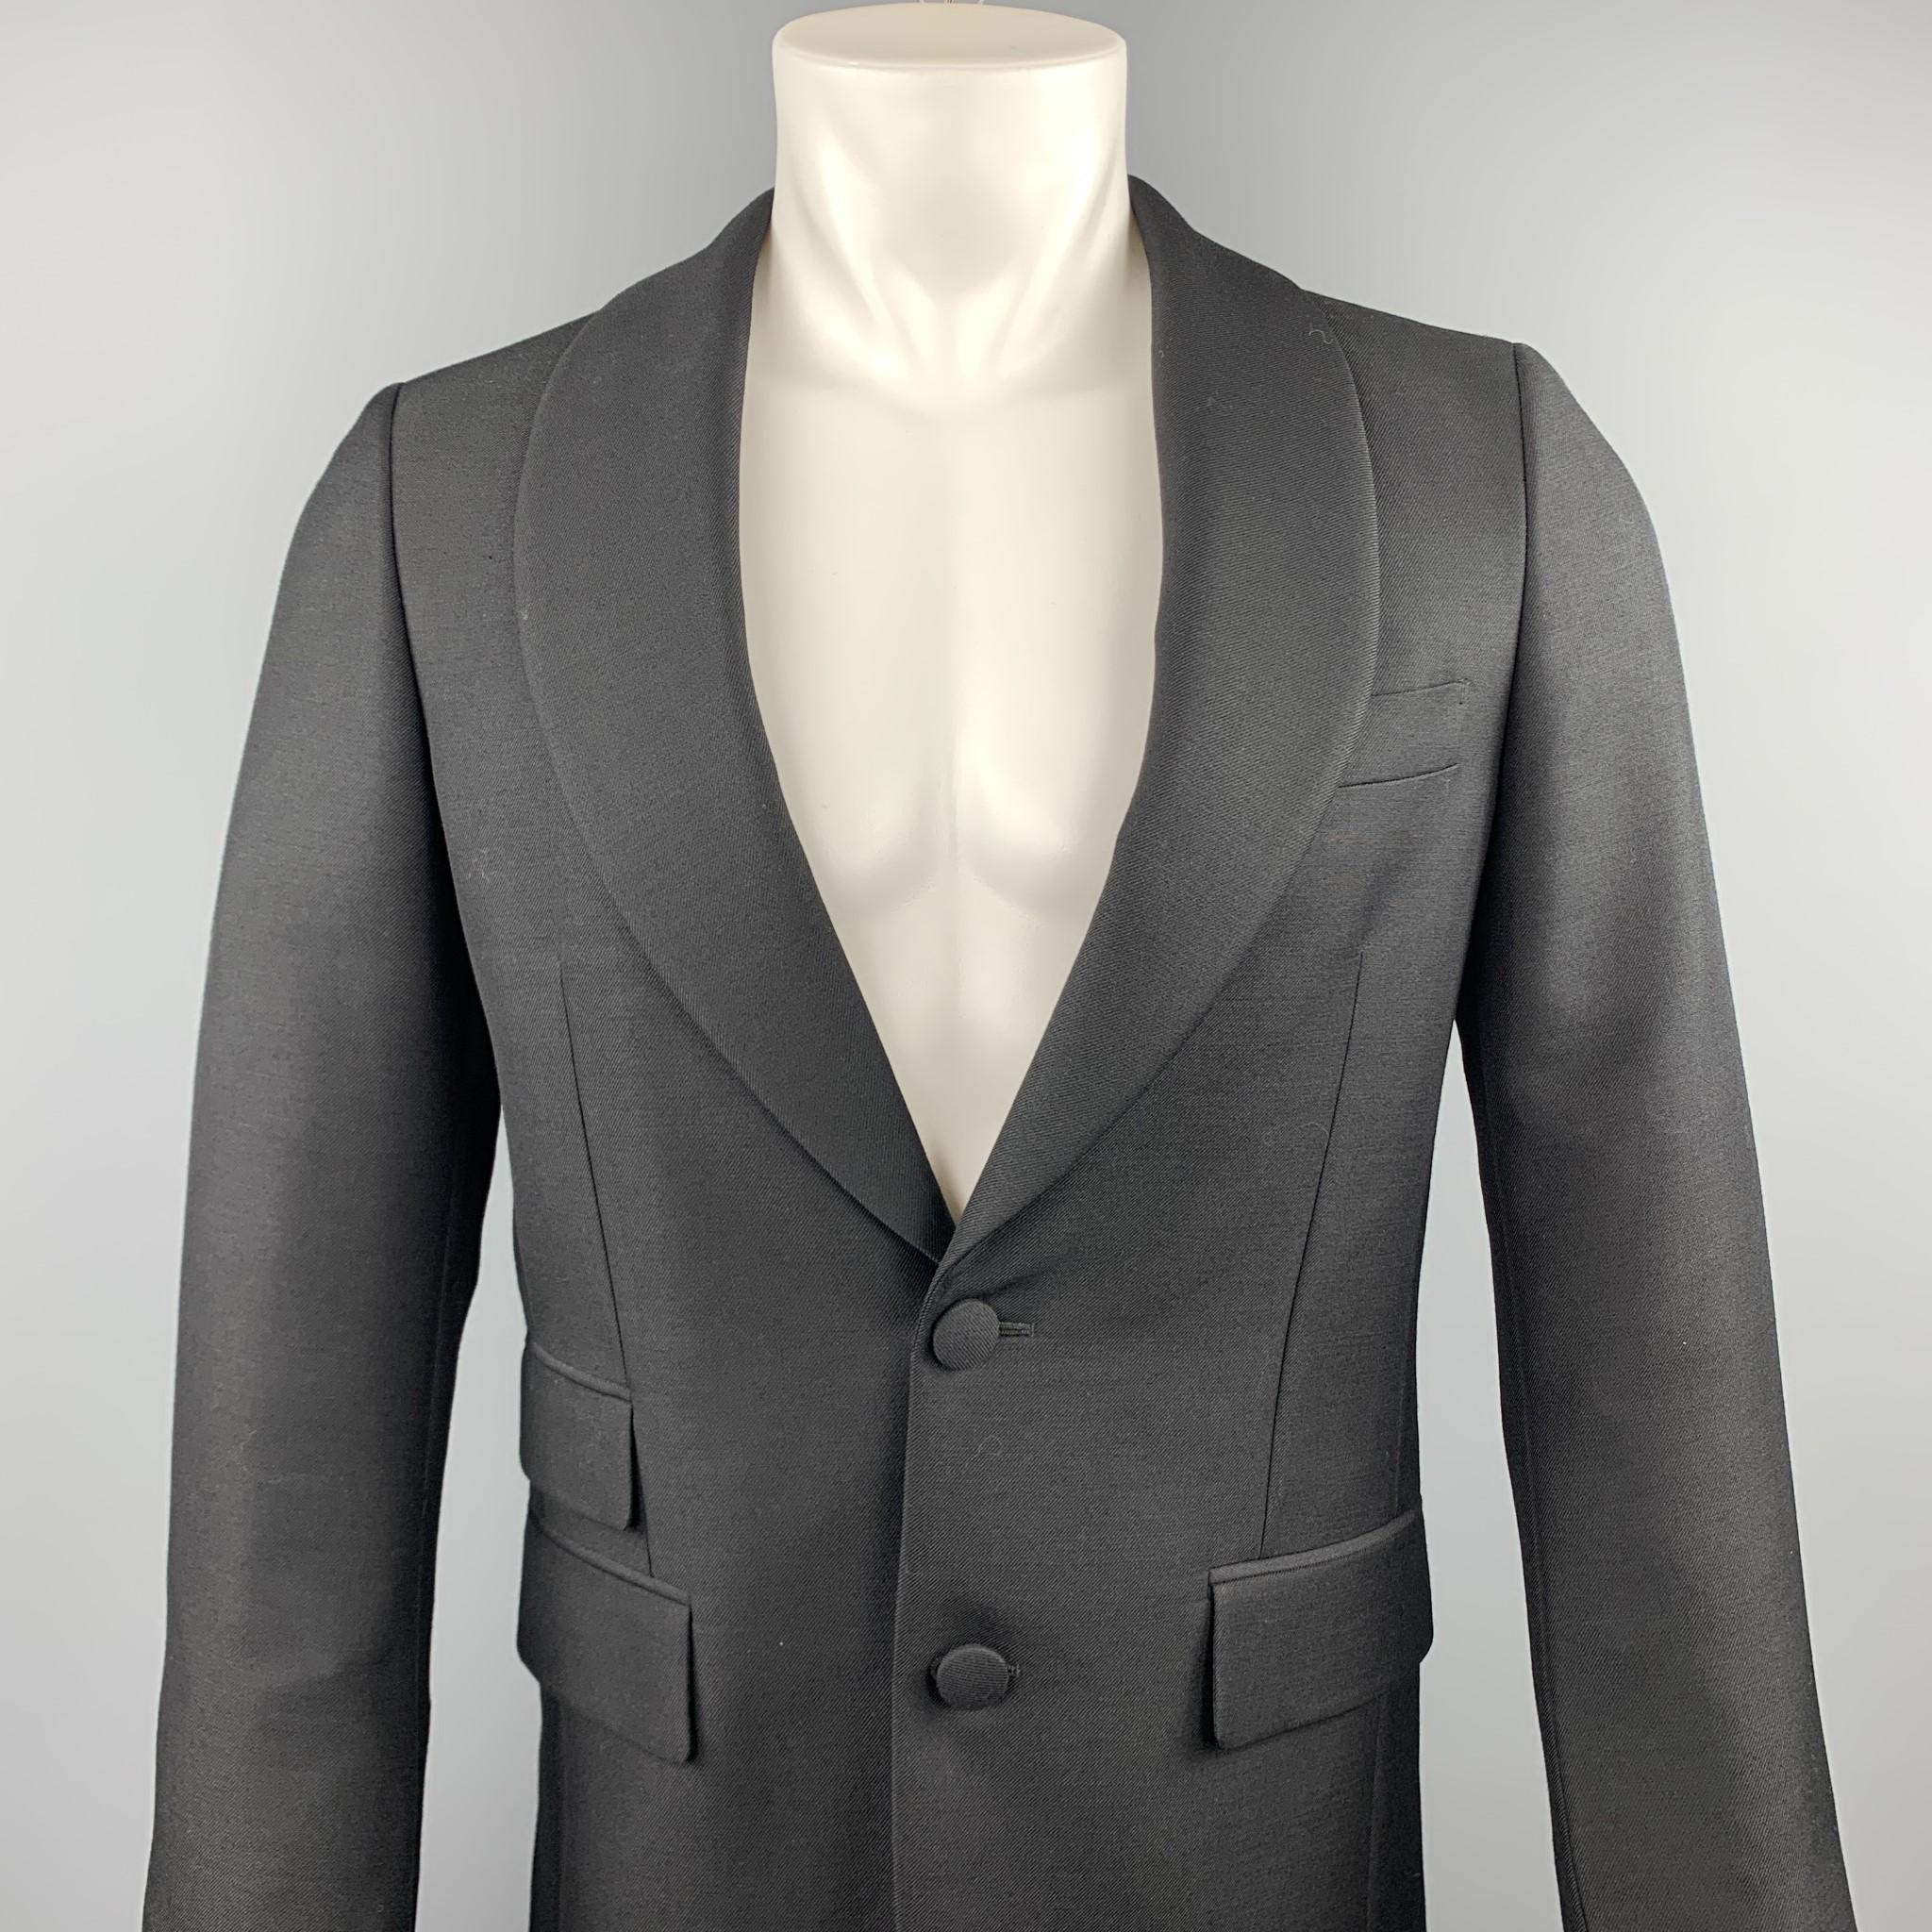 PRADA sport coat comes in a black wool / mohair featuring a shawl lapel style, flap pockets, and a two button closure. Made in Italy.

Excellent Pre-Owned Condition.
Marked: IT 46

Measurements:

Shoulder: 16 in.
Chest: 36 in. 
Sleeve: 27 in.